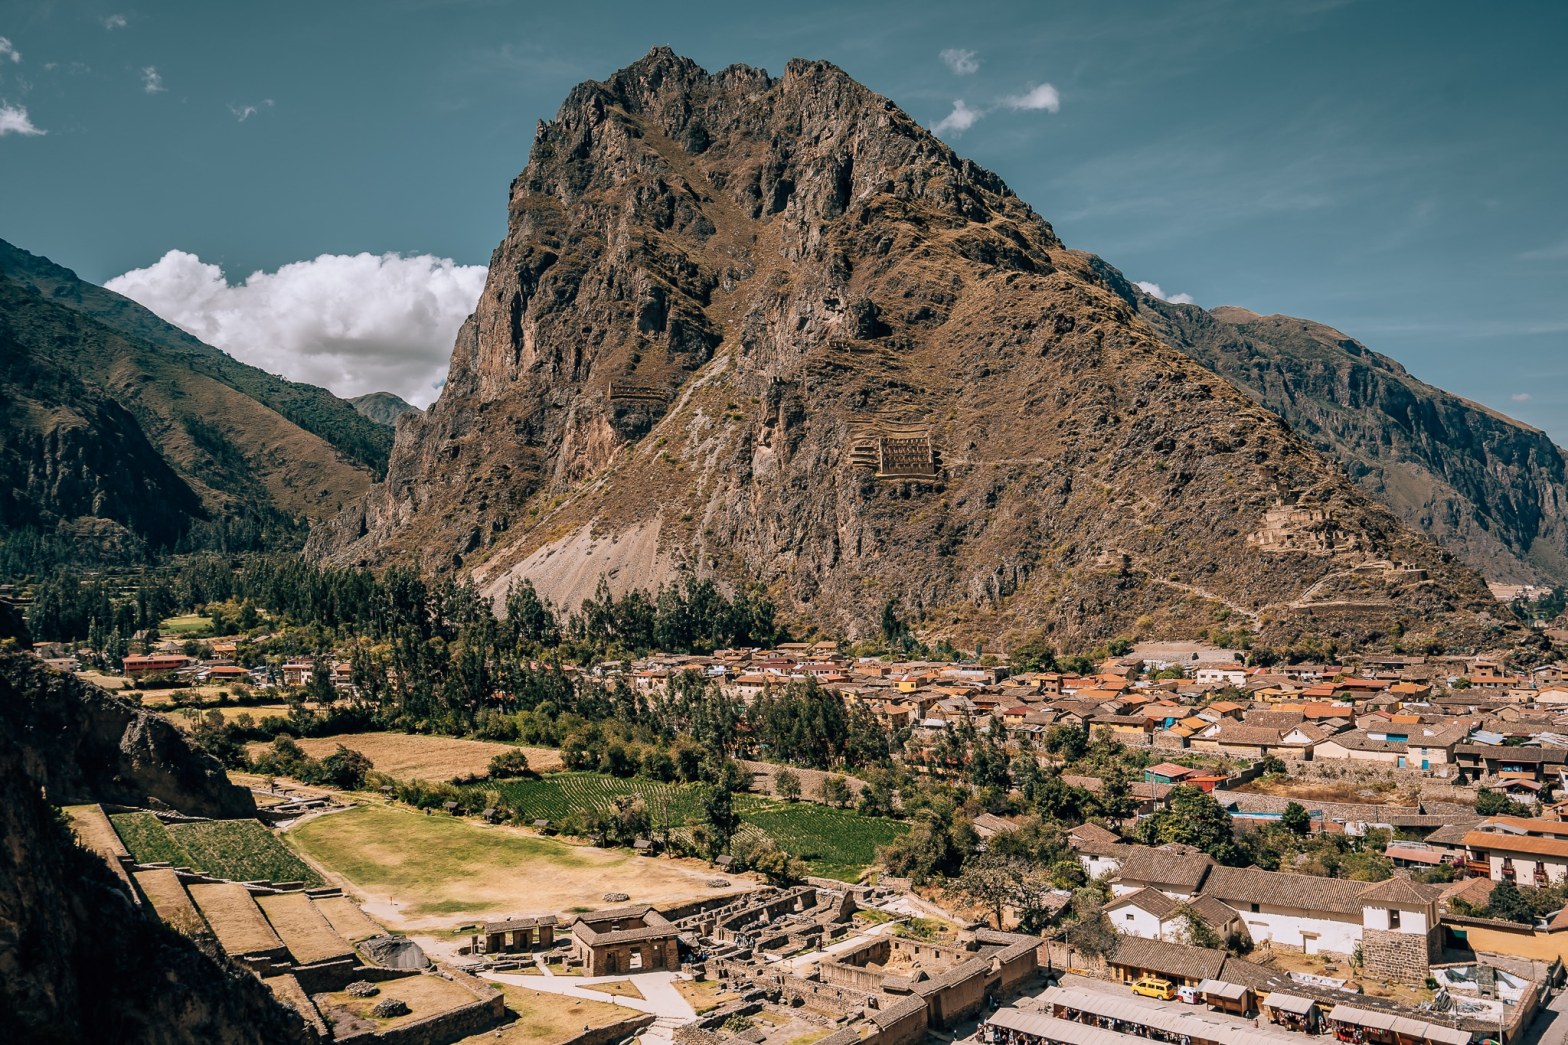 Giant mountain sticking out of the small town of Ollantaytambo